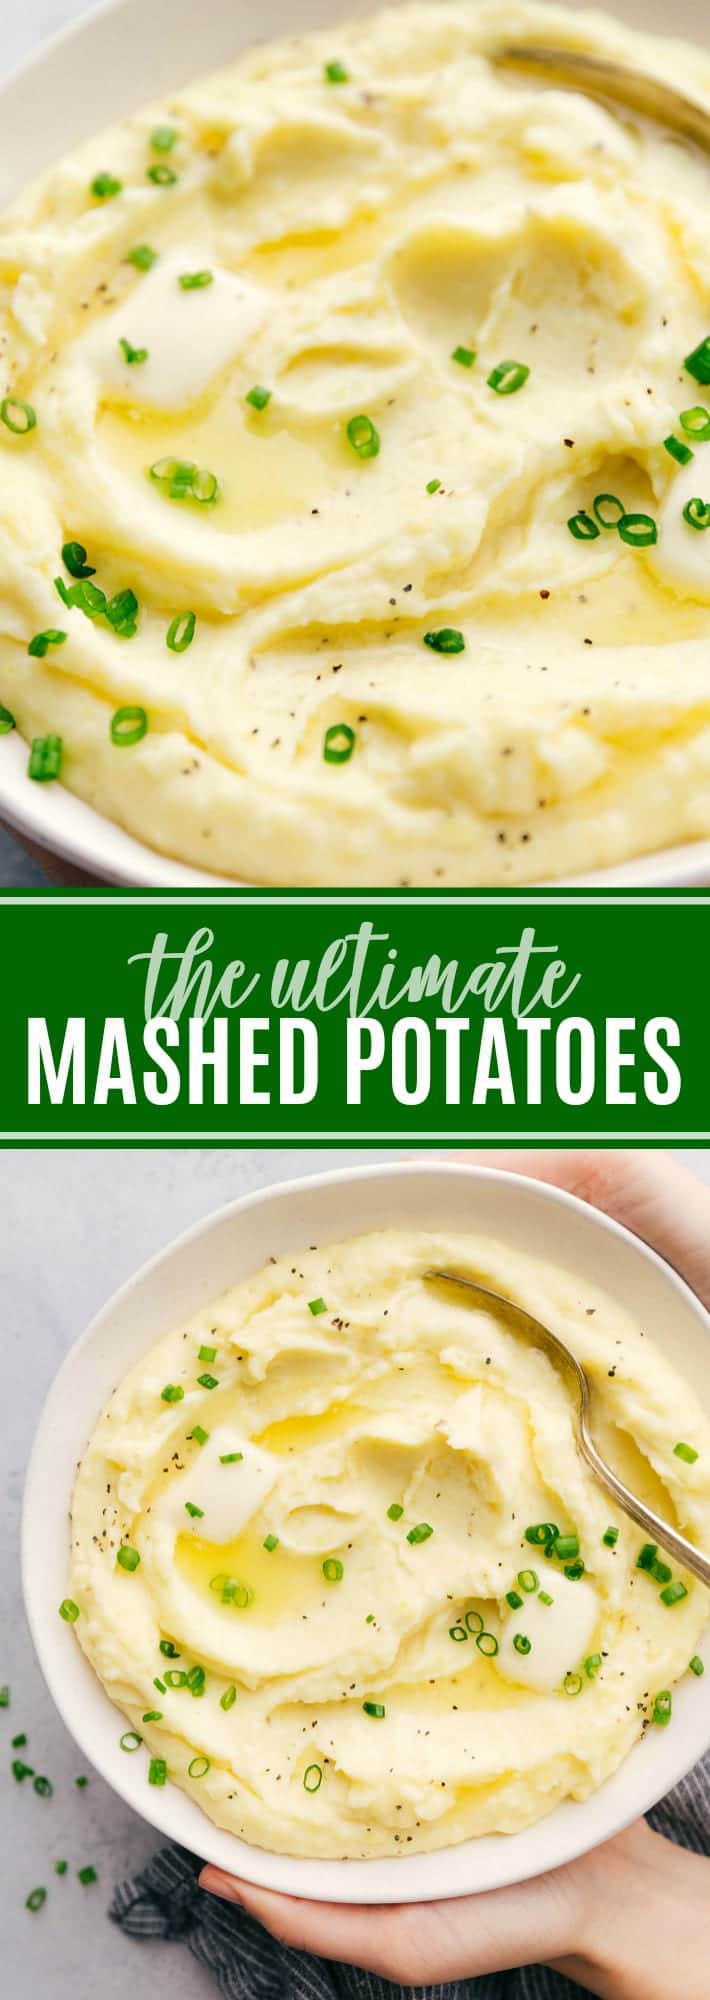 Creamy mashed potatoes recipe with tips and tricks on how to make mashed potatoes the BEST. Everything you need to know about making the perfect potatoes! via chelseasmessyapron.com #mashed #potatoes #potato #recipe #easy #quick #thanksgiving #dinner #christmas #holiday #holidays